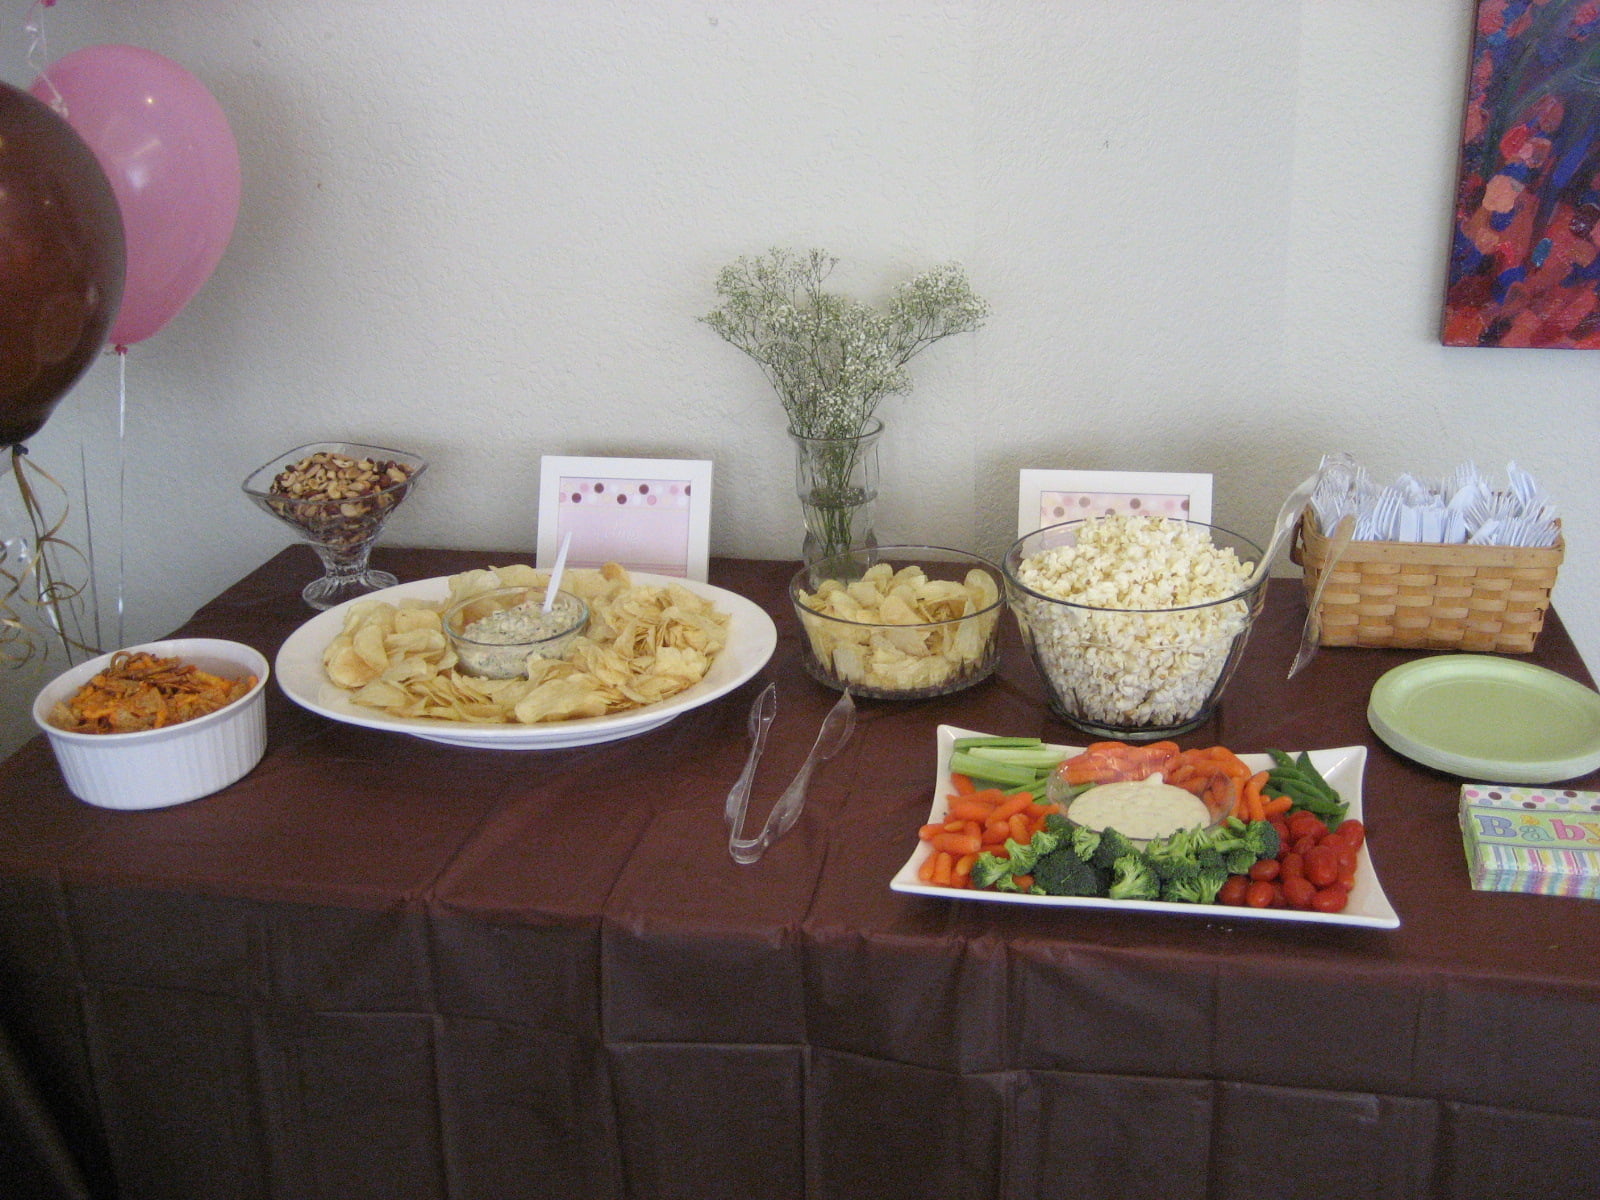 Healthy Food For Baby Shower Lunch